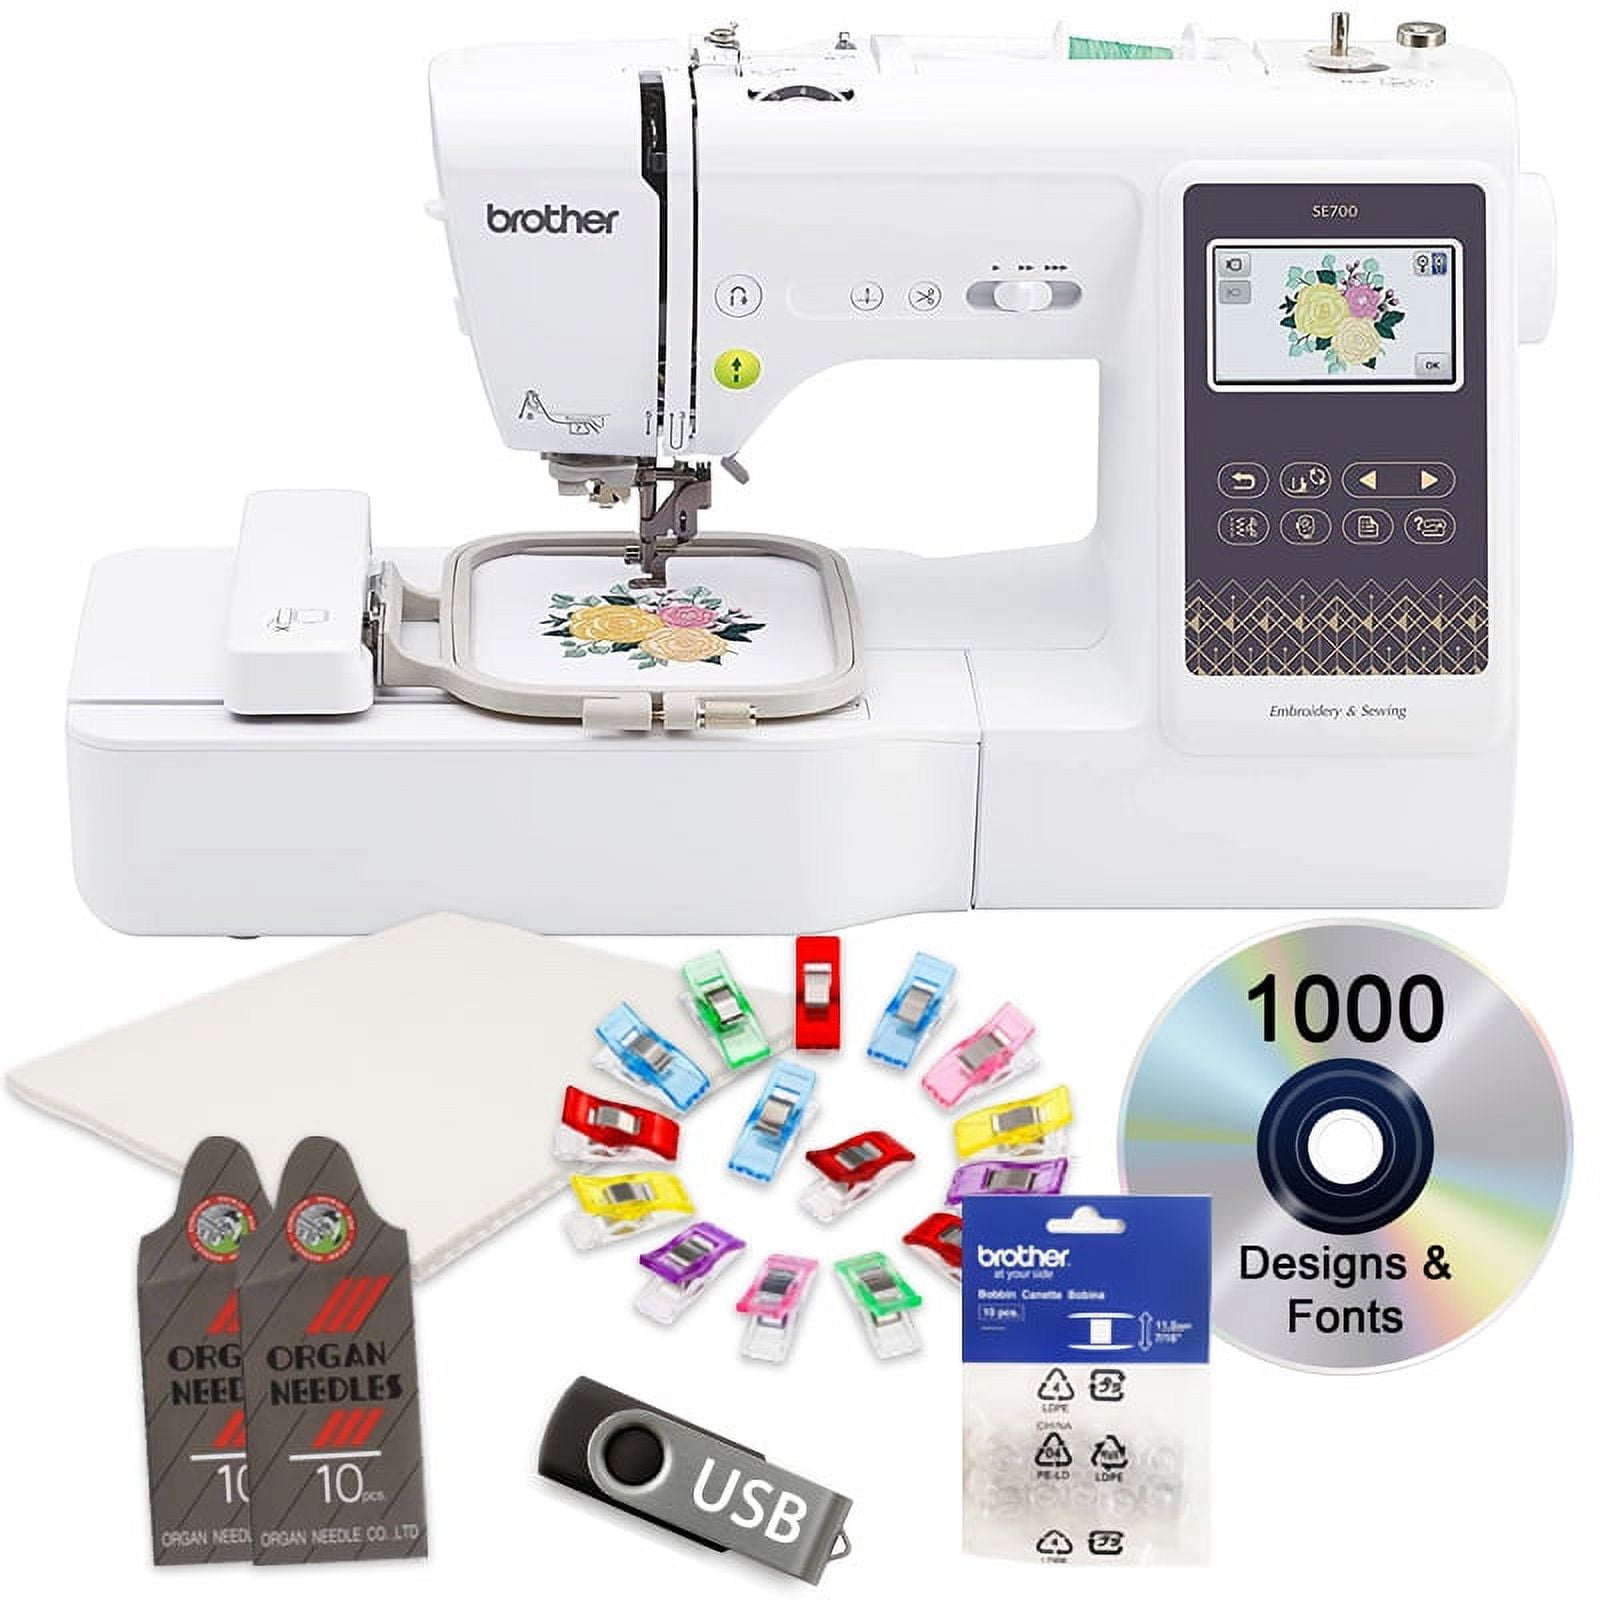 Brother SE700 Sewing and Embroidery Machine Wireless LAN Connected